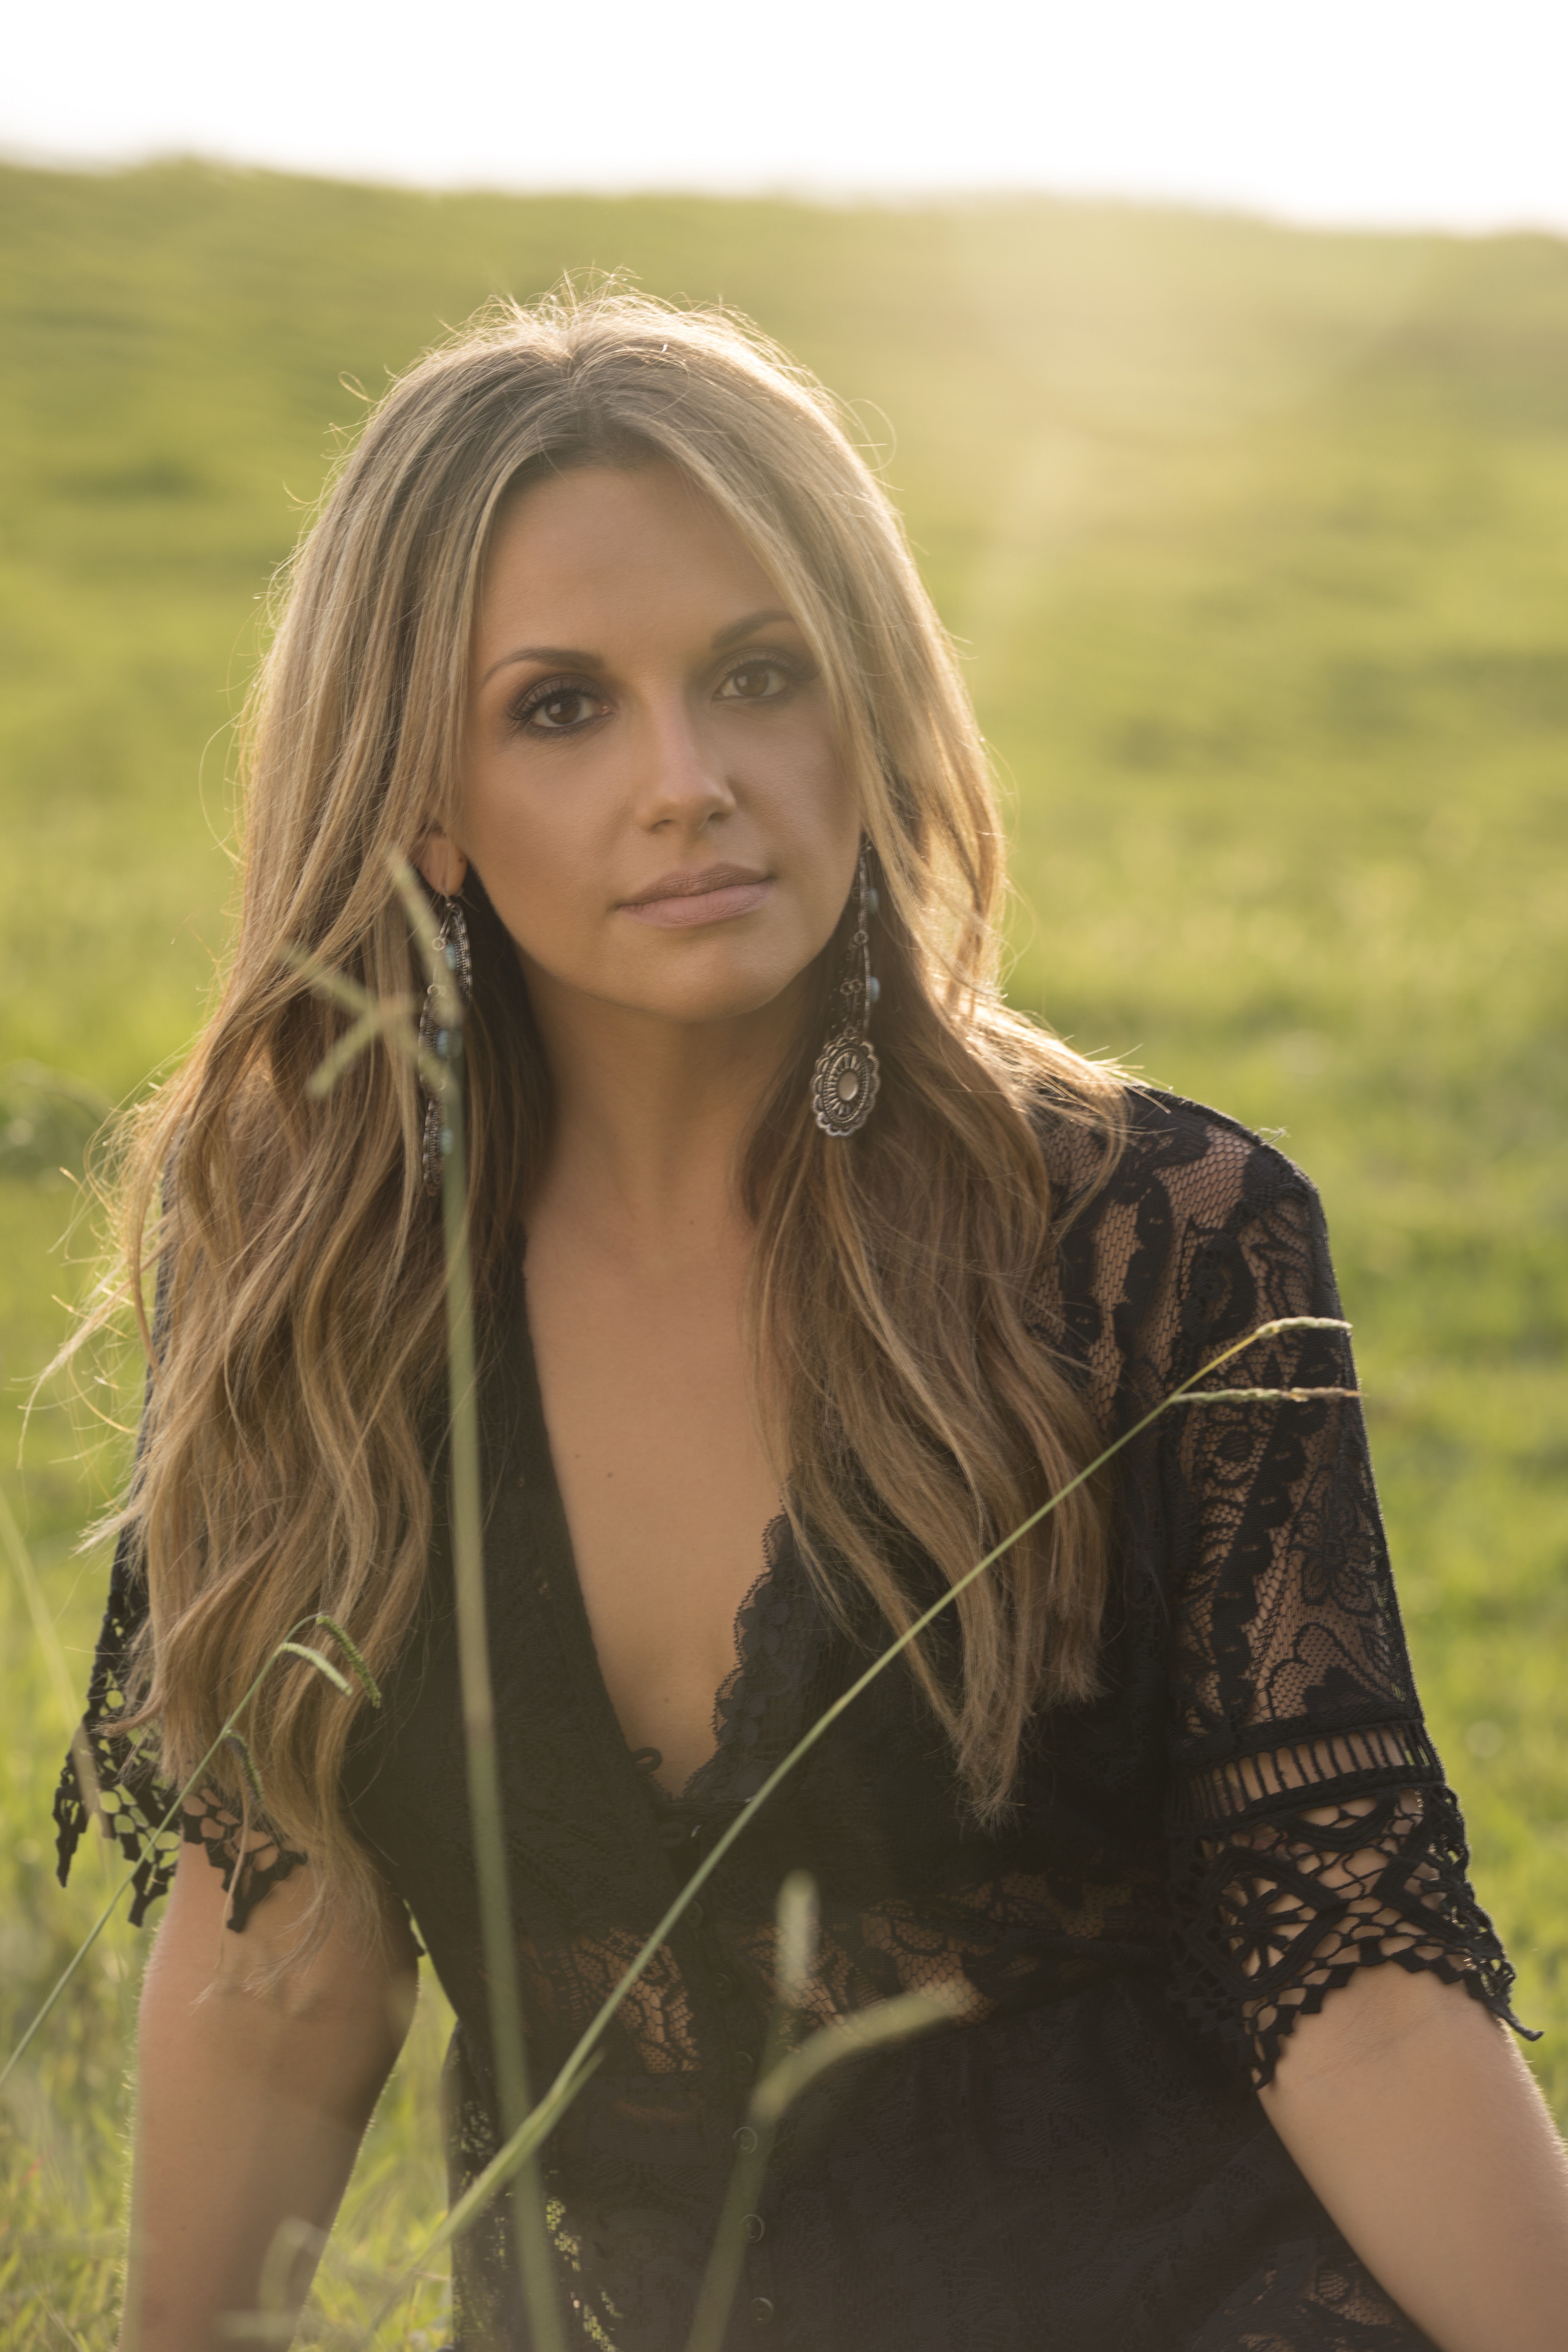 Carly Pearce @ Watershed 2019 | Carly Pearce performs on 